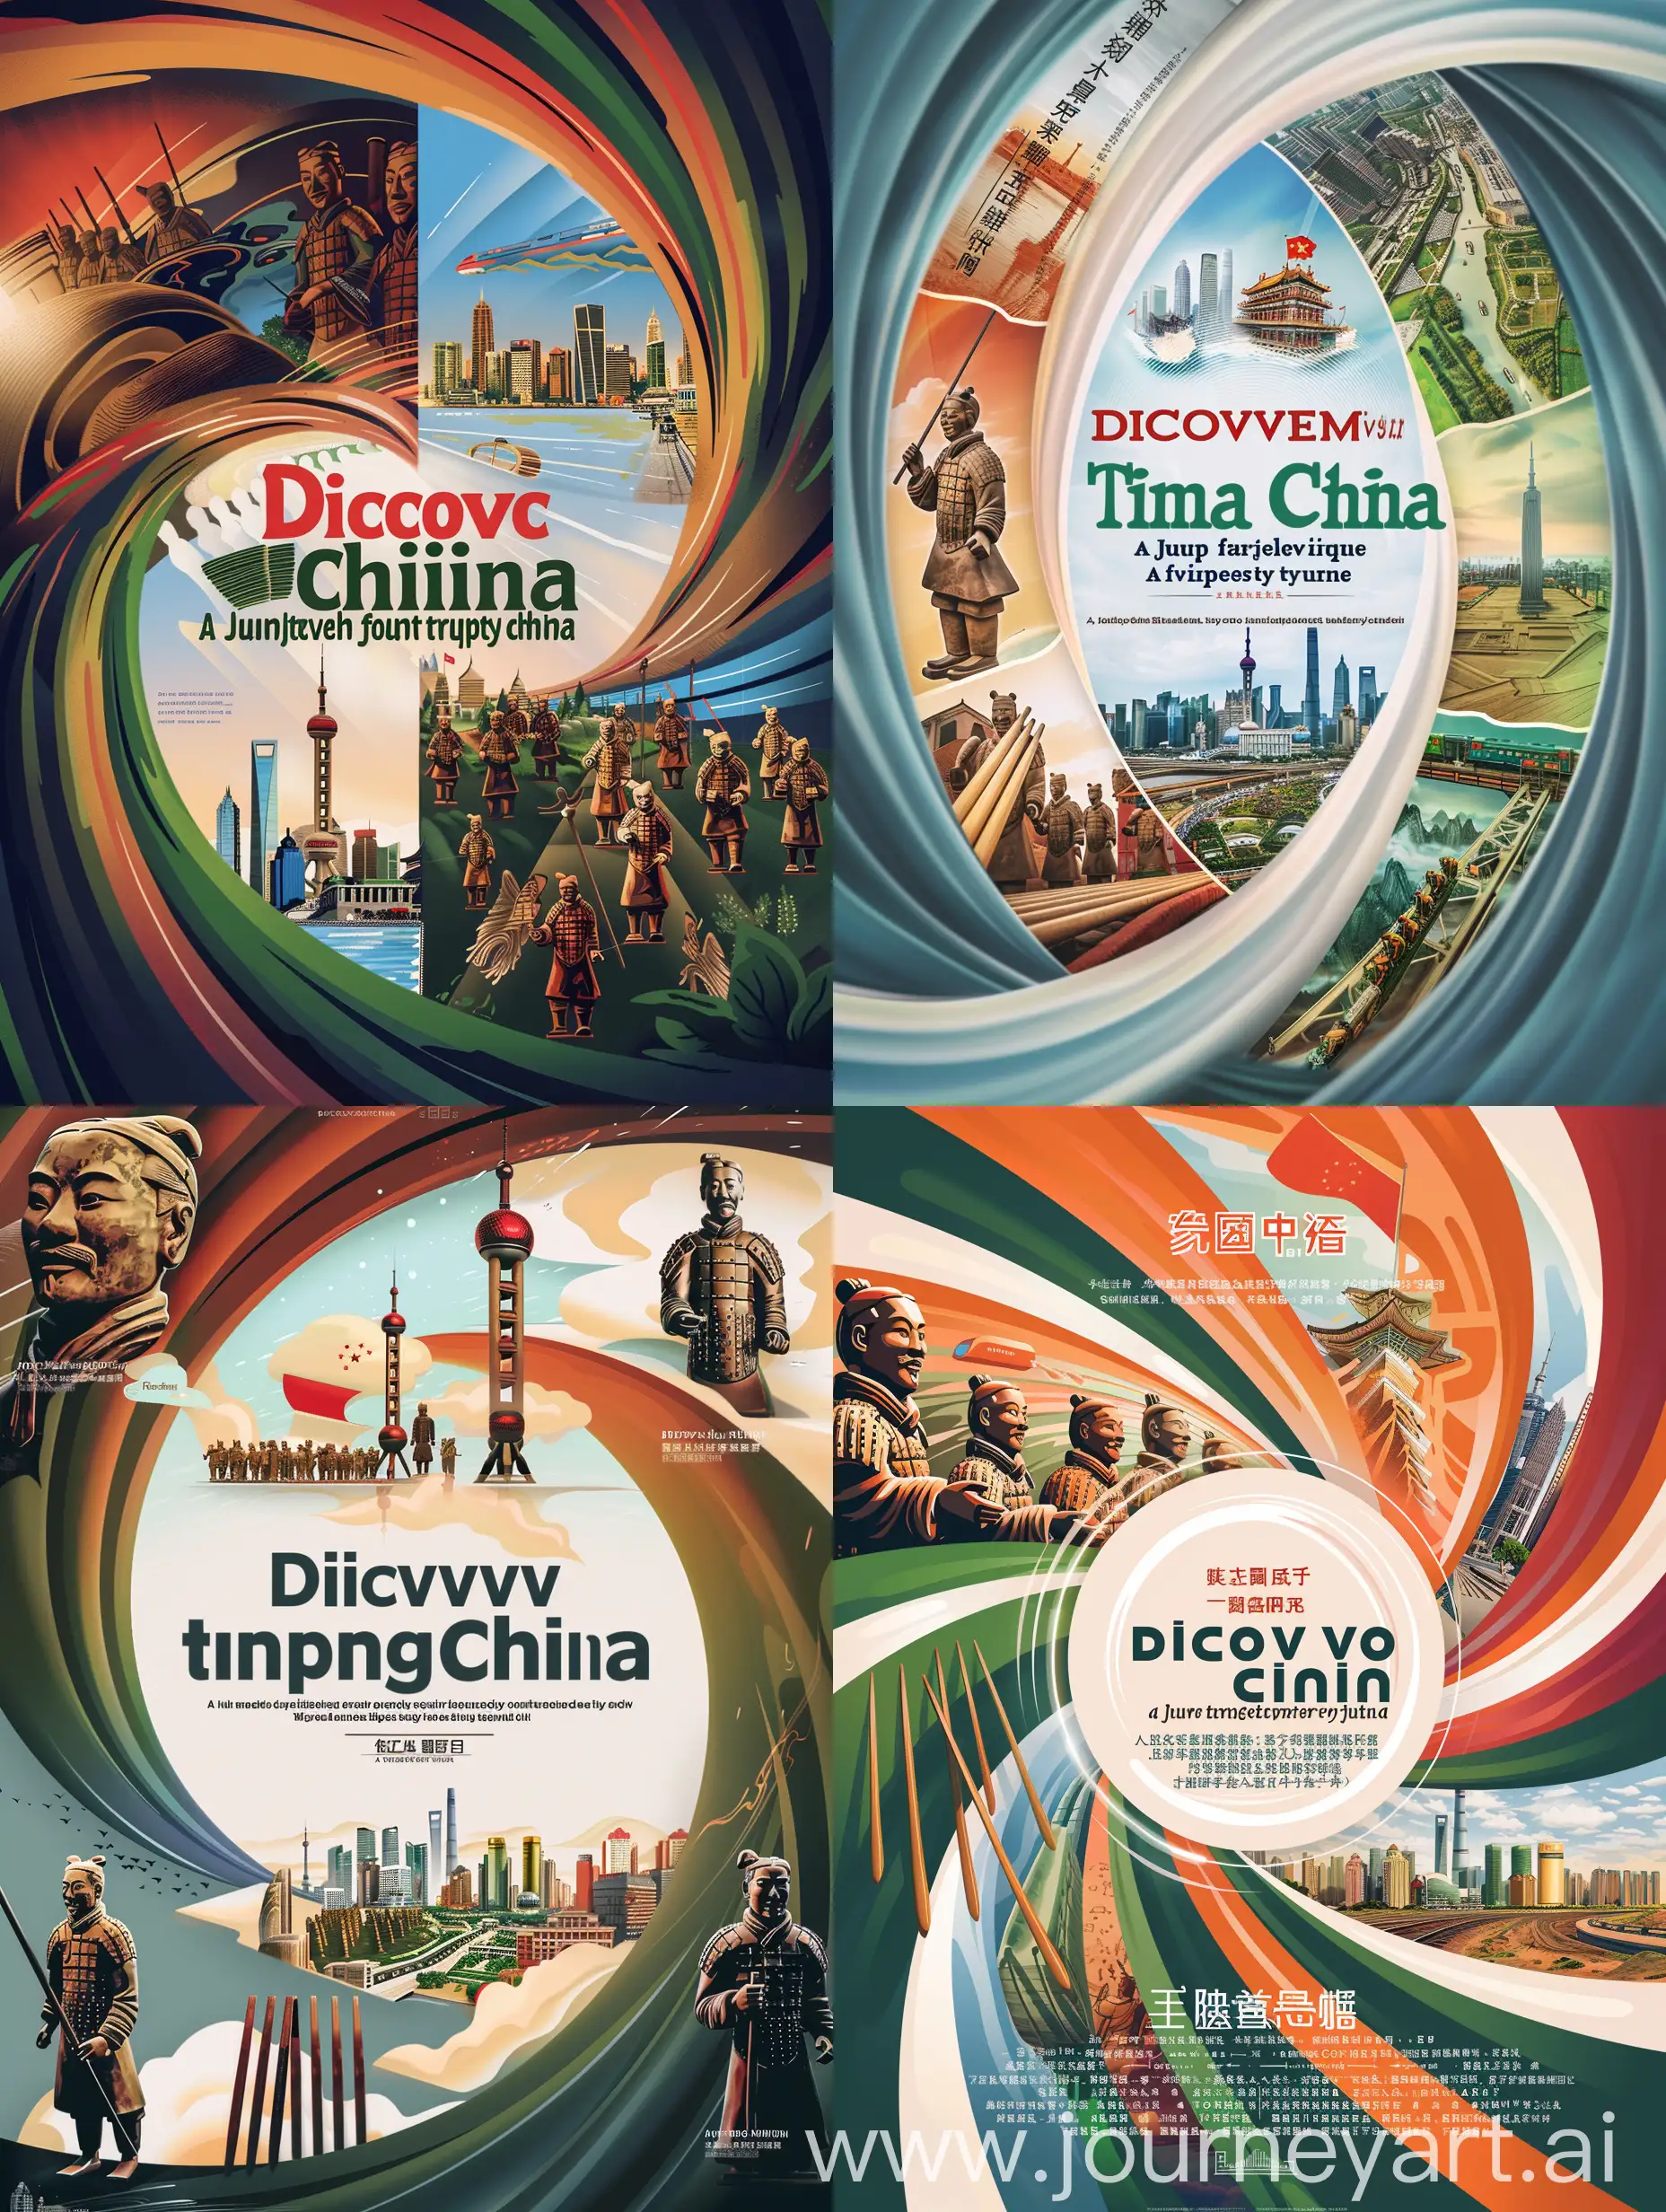 Create an artistic, dynamic poster that embodies the concept of 'Time Travel Through China'. Visualize a swirling time vortex in the background, merging ancient China with its modern achievements and futuristic aspirations. Incorporate traditional Chinese elements like the Terracotta Warriors and chopsticks on one side, representing the rich cultural heritage. Transition into modern China with symbols like the high-speed train, Shanghai's skyline, and the Belt and Road Initiative in the center. Progress towards a futuristic vision of China with images of green energy solutions, advanced technology, and smart cities on the opposite side. Ensure the design is harmonious, with a smooth gradient from past to future, illustrating China's journey through time. Include engaging elements that draw the viewer’s eye along the timeline, with a central bold title 'Discover China: A Journey from Past to Future'. Make the style vivid, colorful, yet tastefully balanced, to captivate and educate the audience about China's evolving identity.